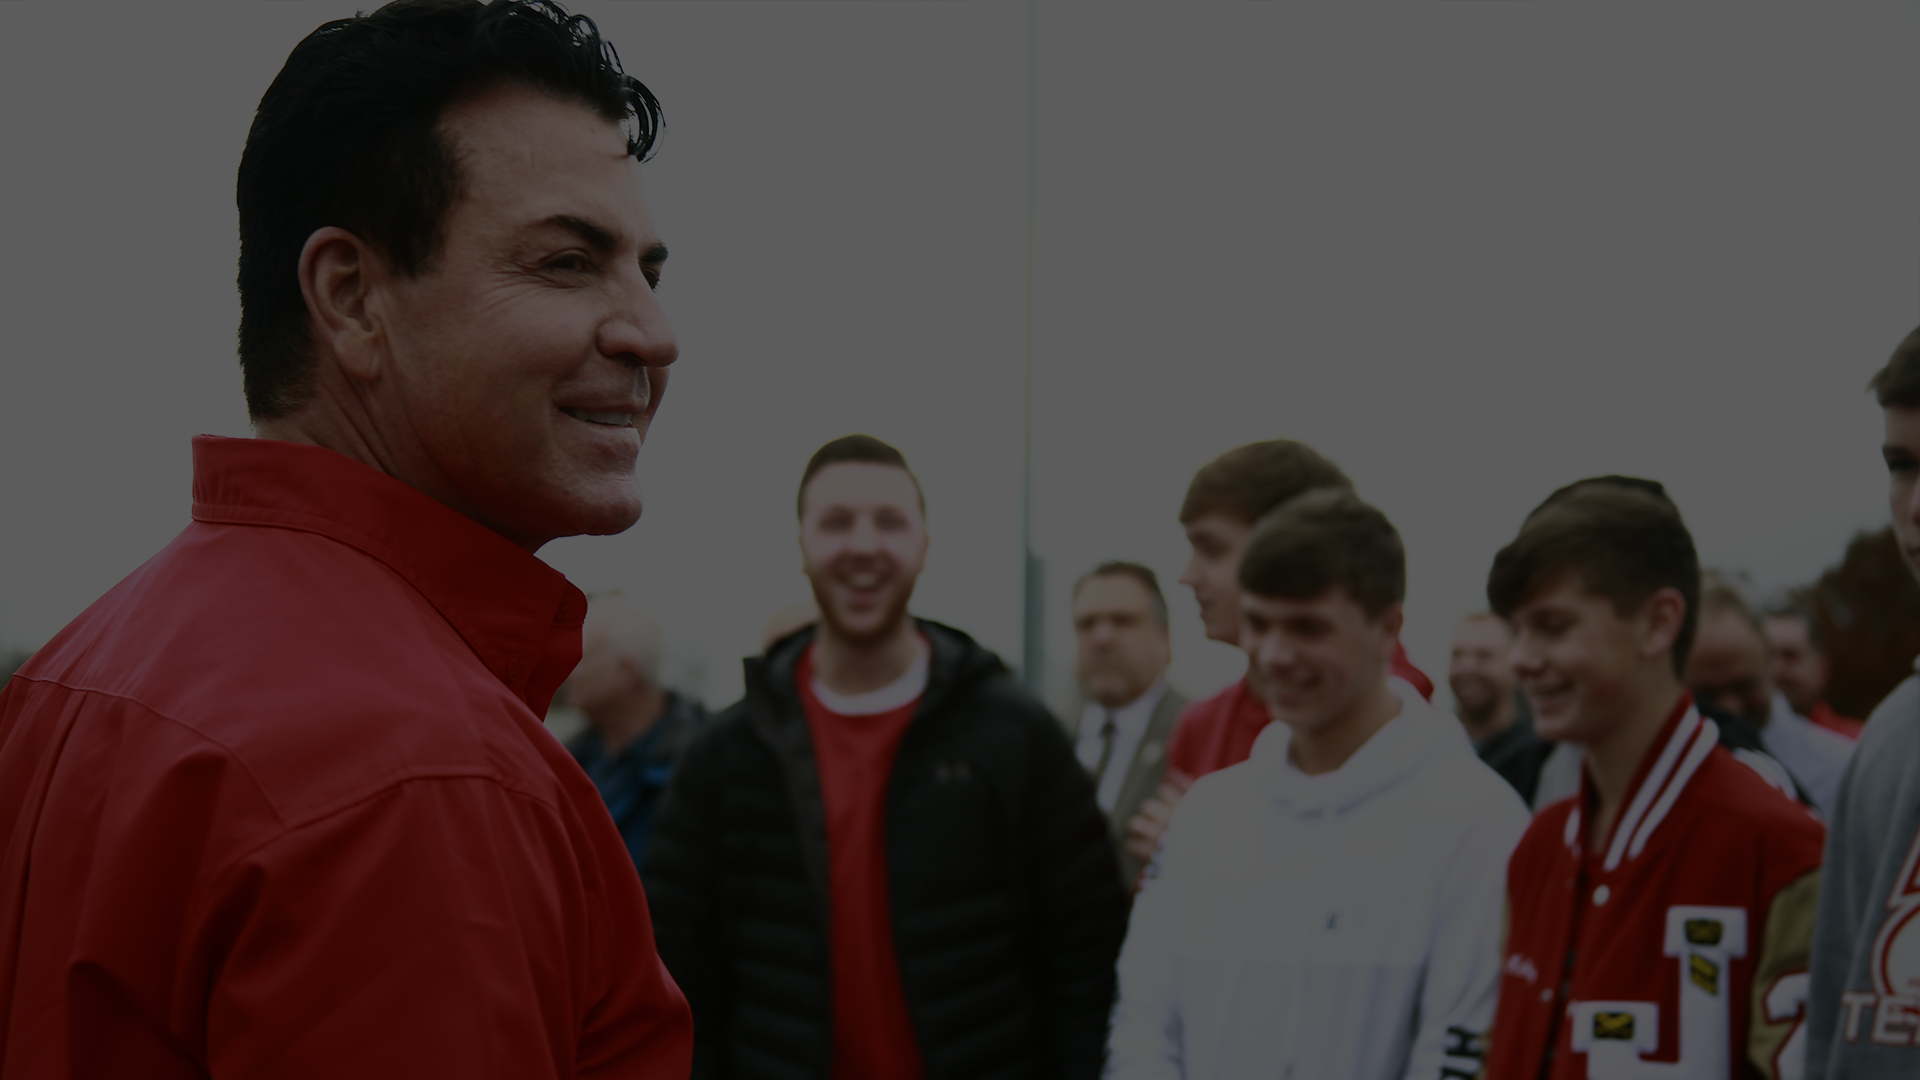 Daily Wire: ‘Papa John’ Says PR Company Planted Racism Allegations After He Would Not Pay $6M